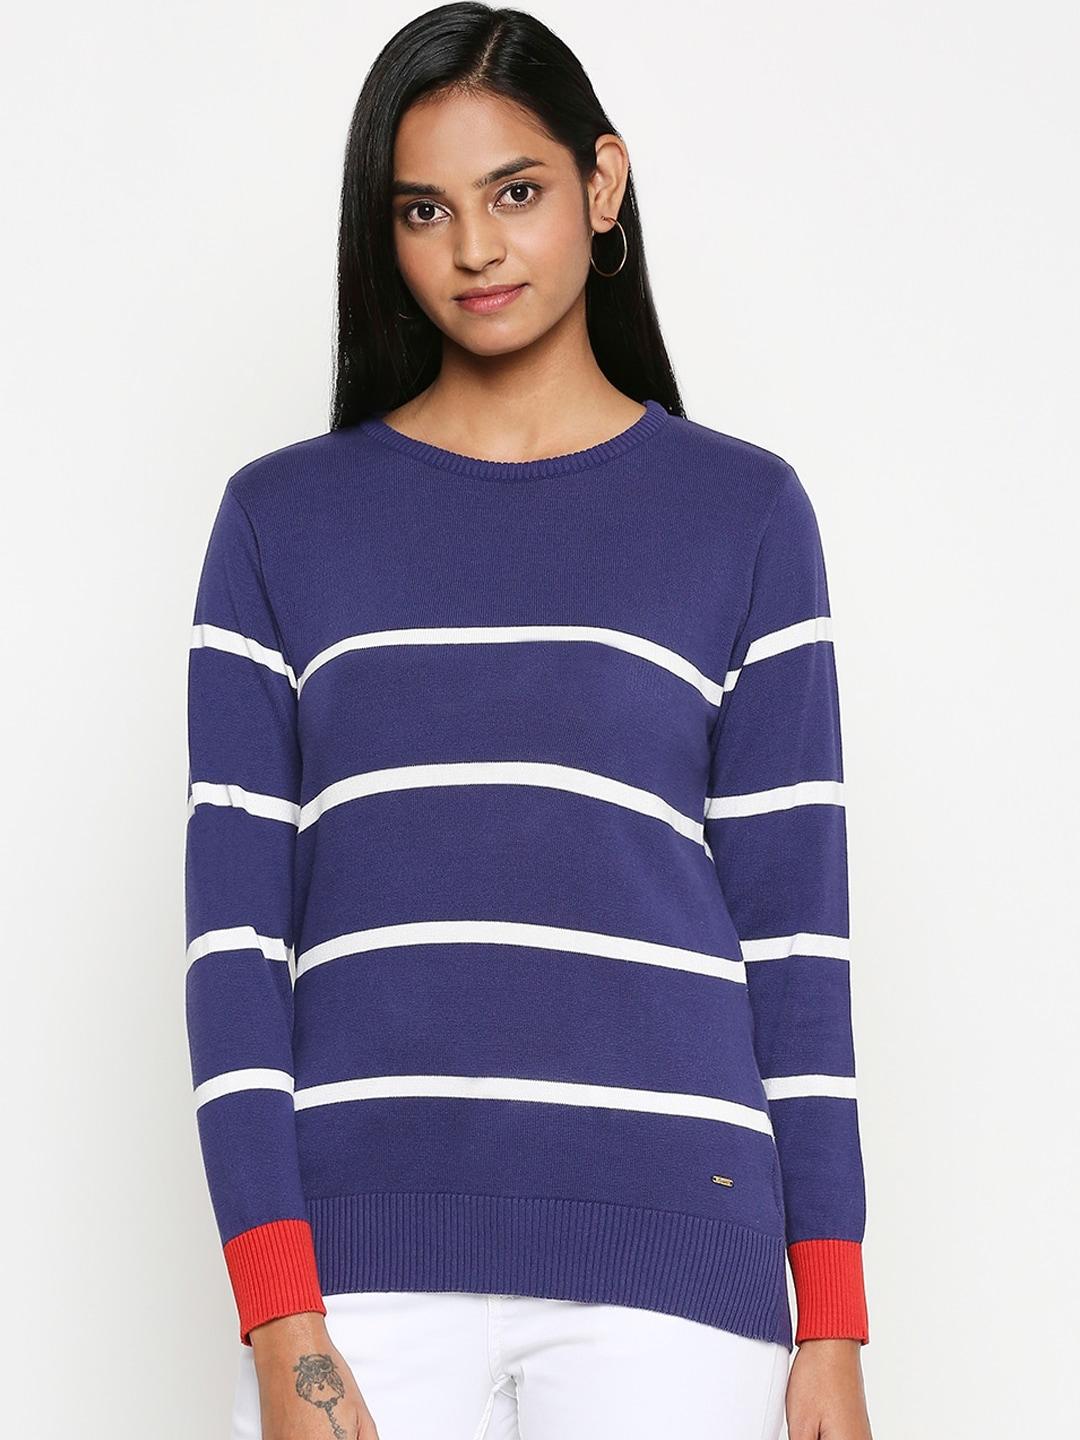 people-women-navy-blue-striped-pullover-sweater